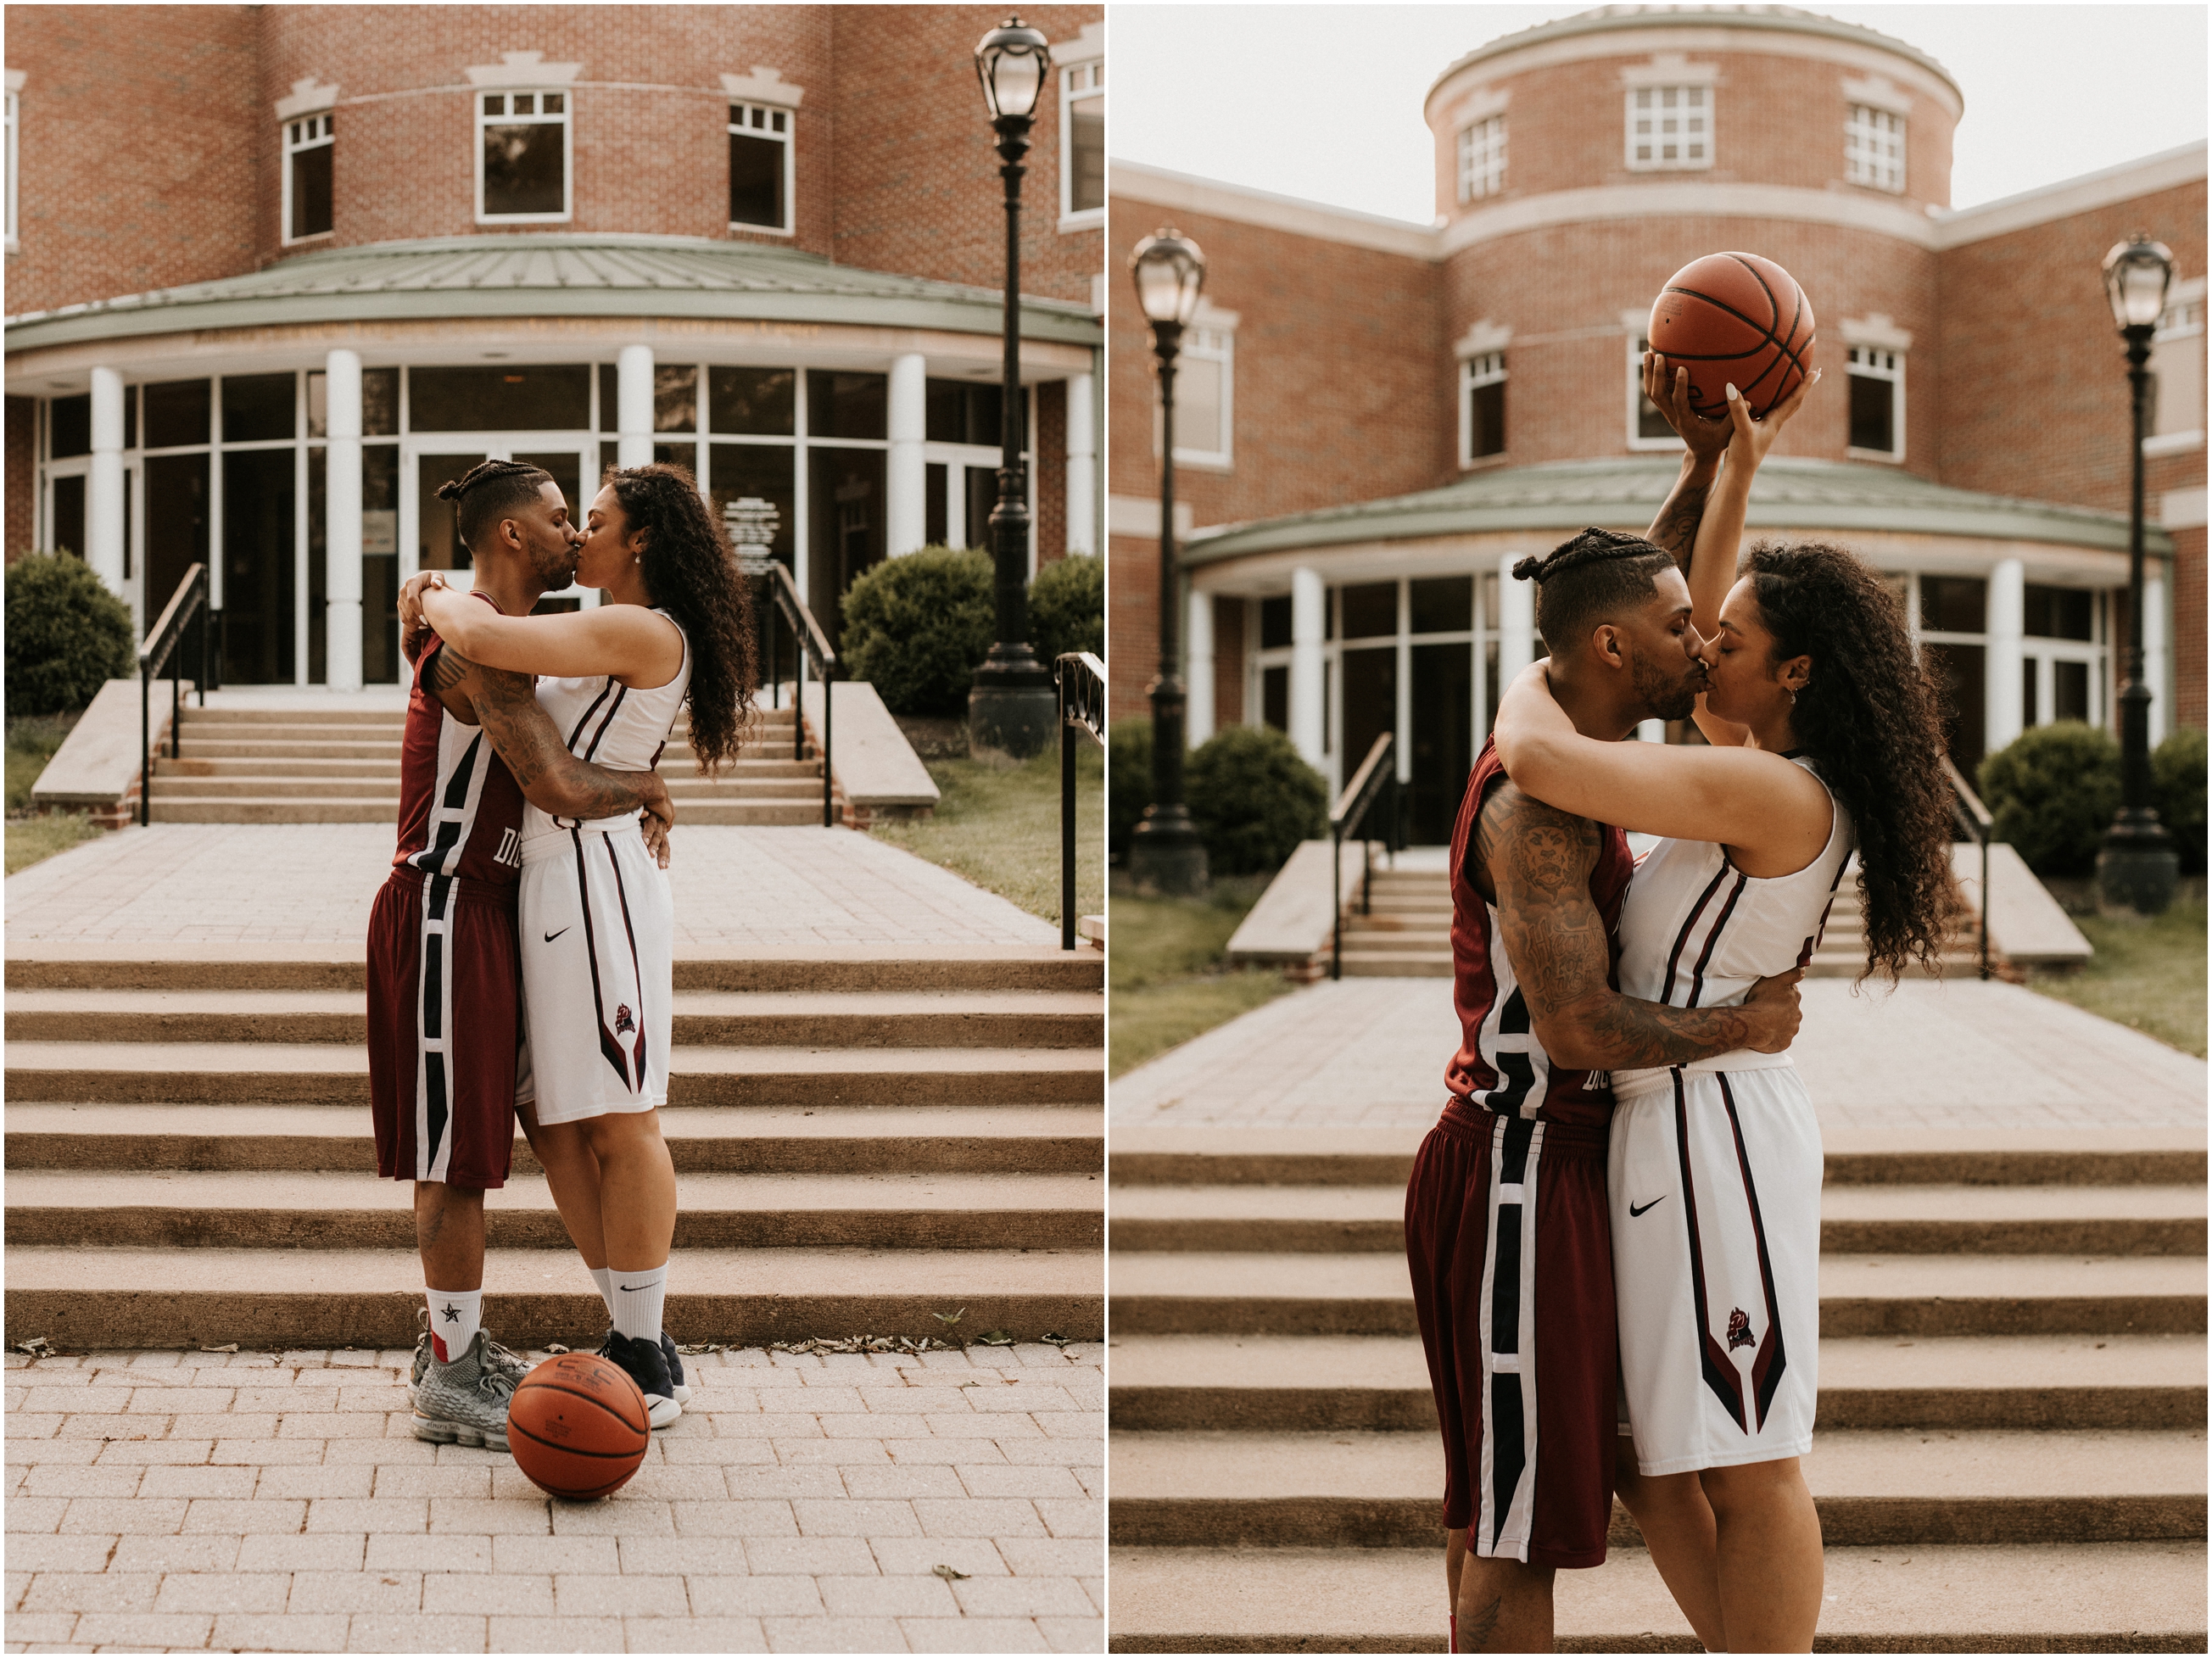 couple in love wearing FDU basketball uniform and holding basketball